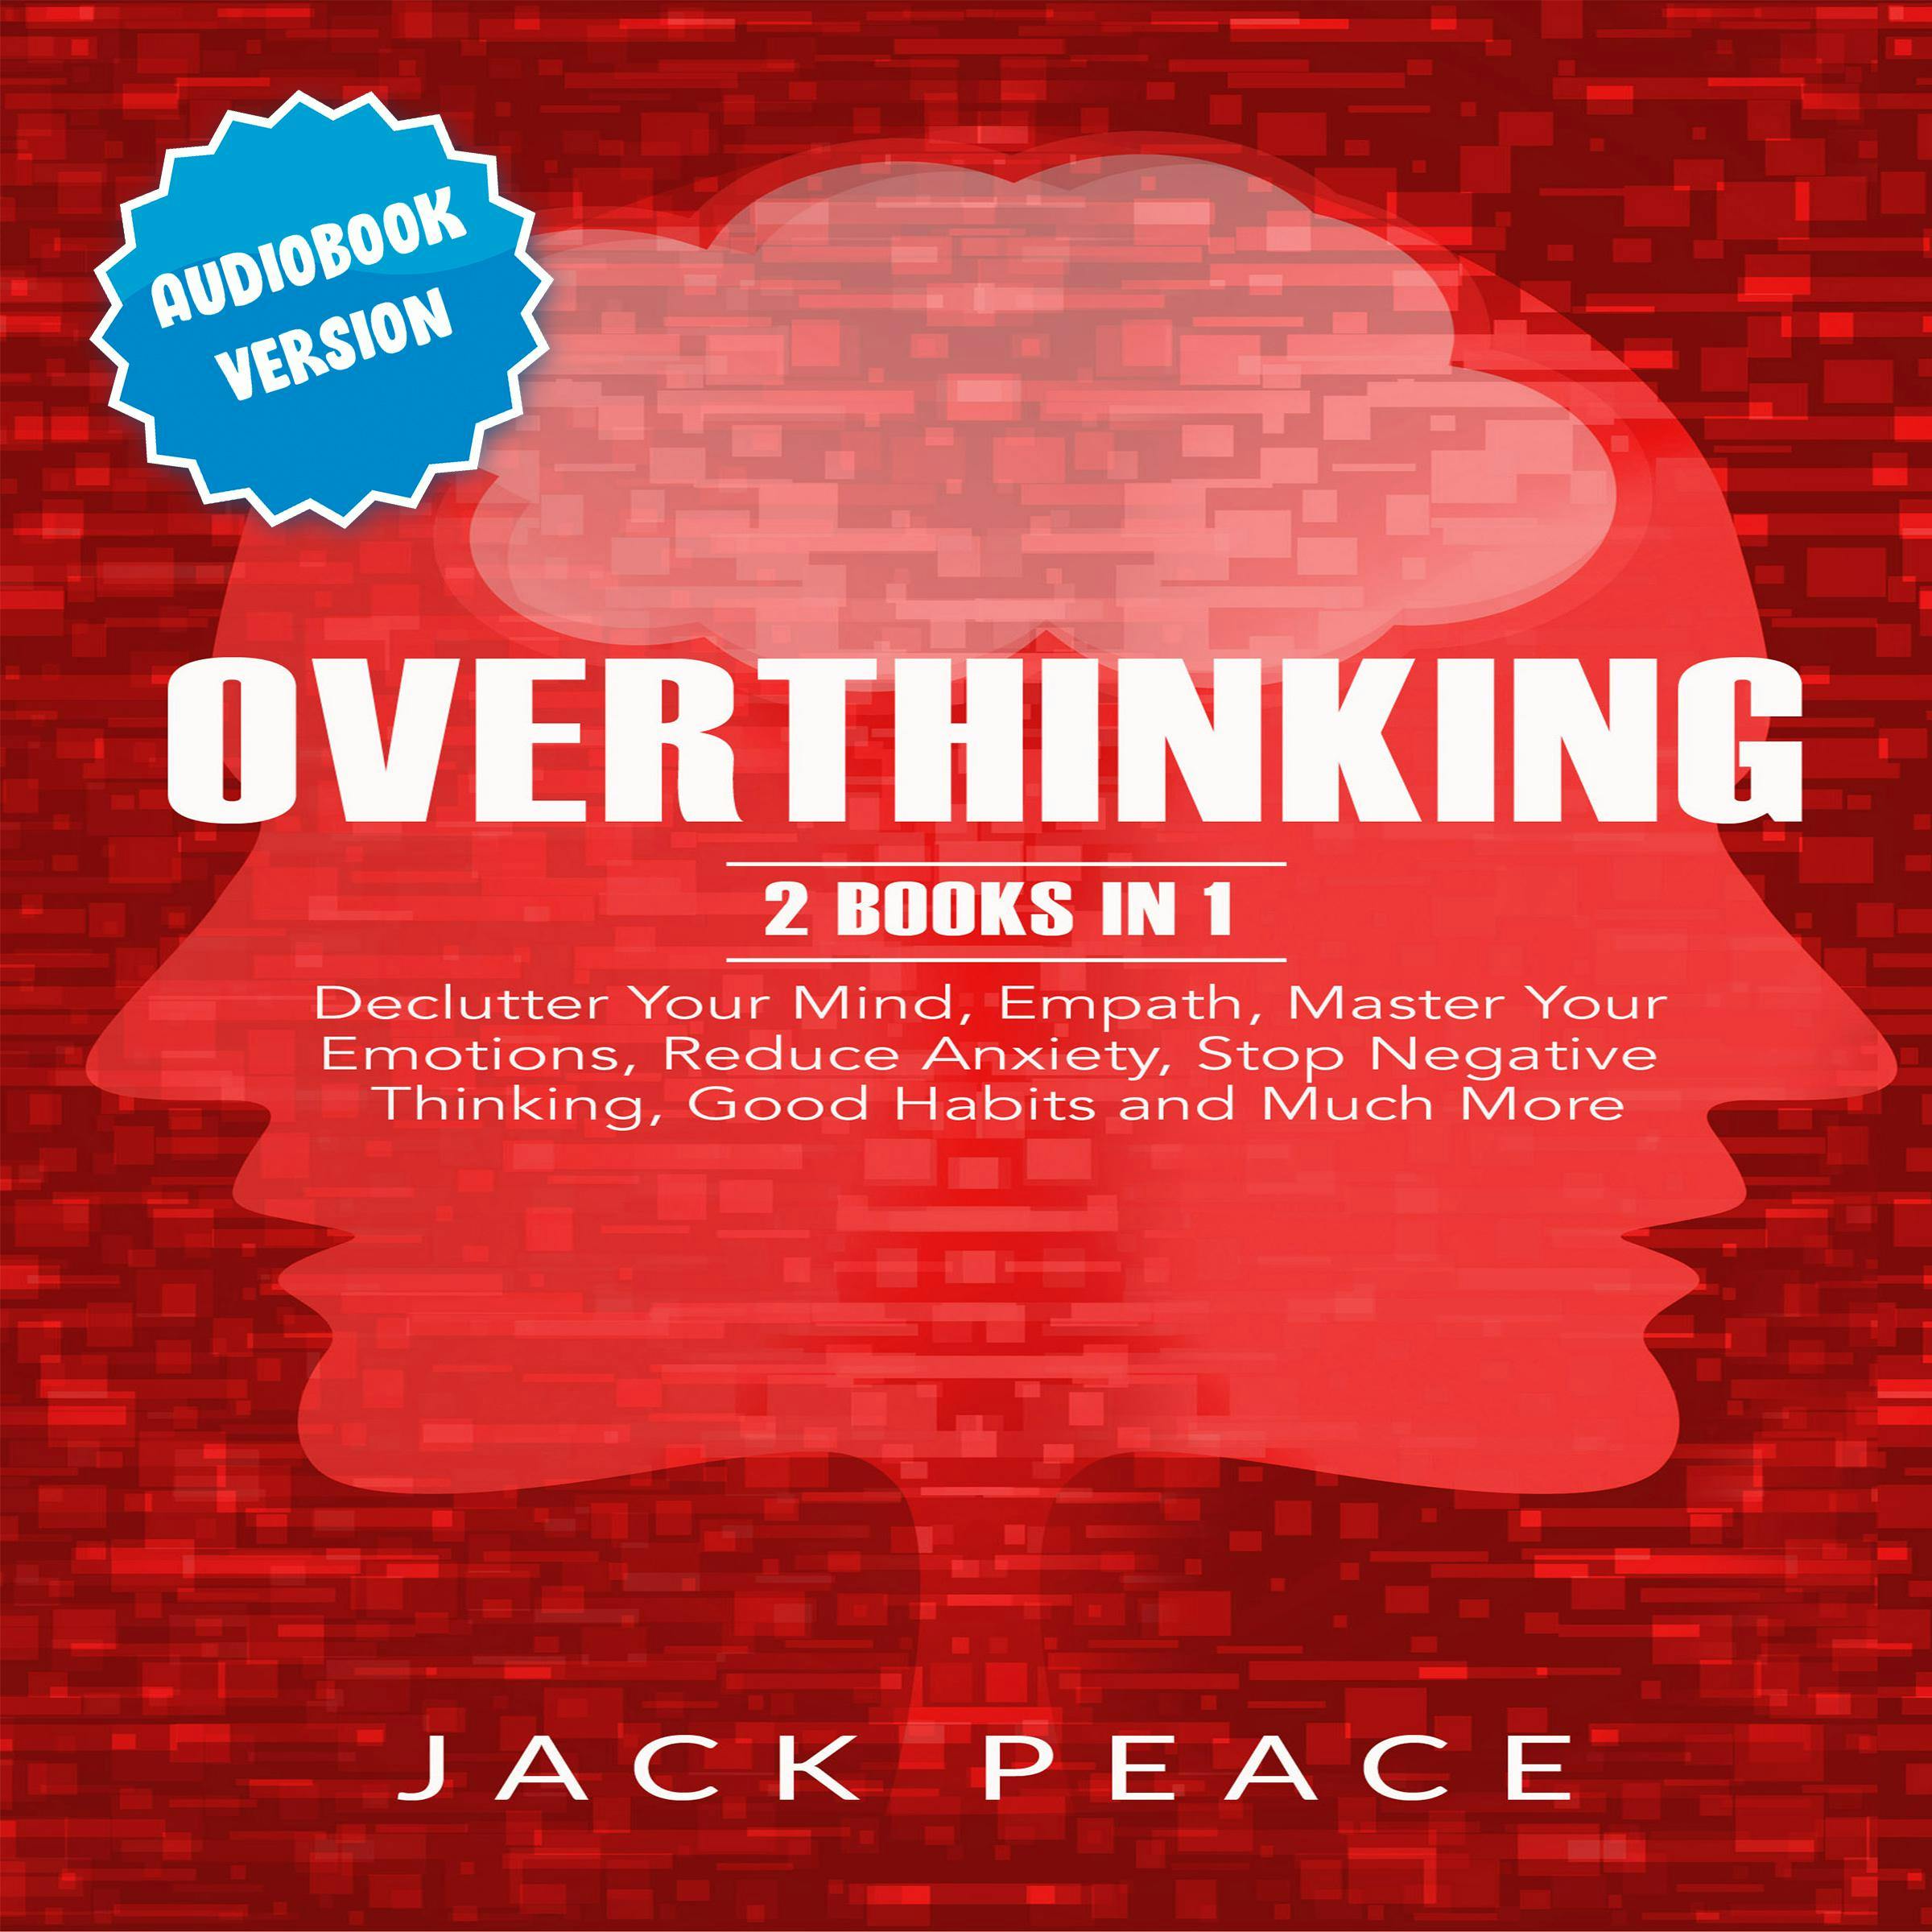 Overthinking: 2 Books in 1: Declutter Your Mind, Empath, Master Your Emotions, Reduce Anxiety, Stop Negative Thinking, Good Habits and Much More - Jack Peace